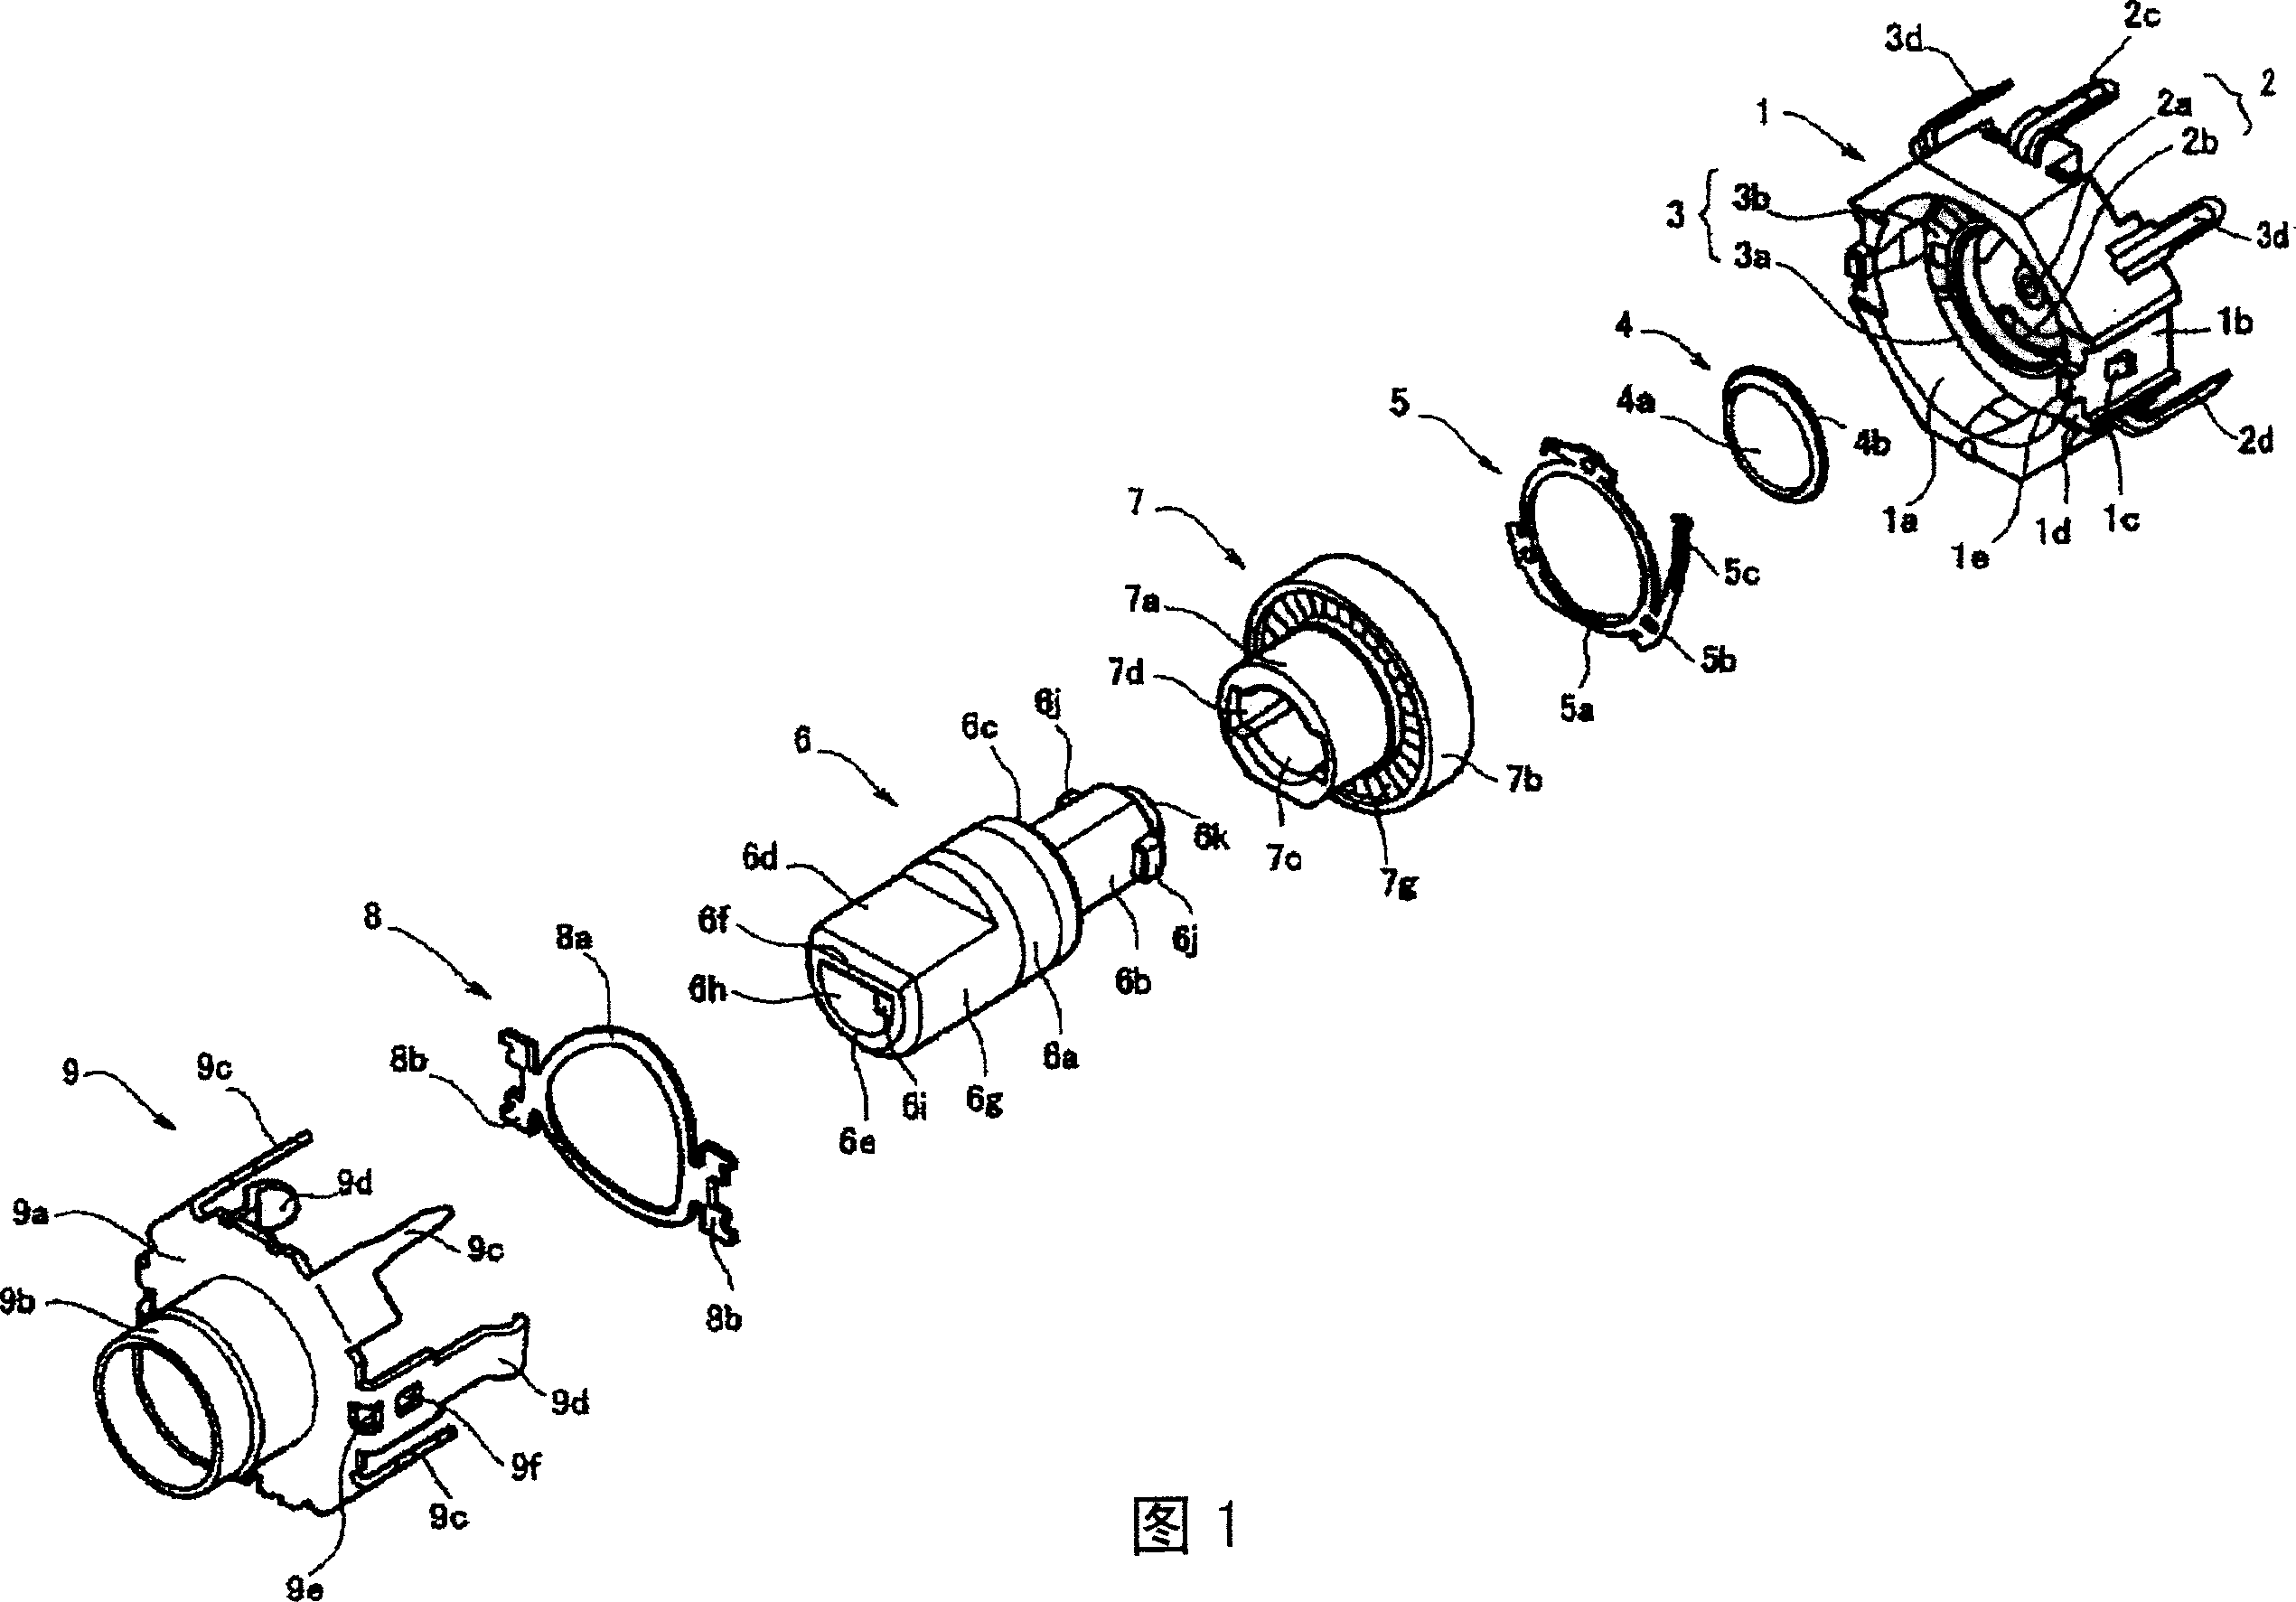 Rotary electrical component